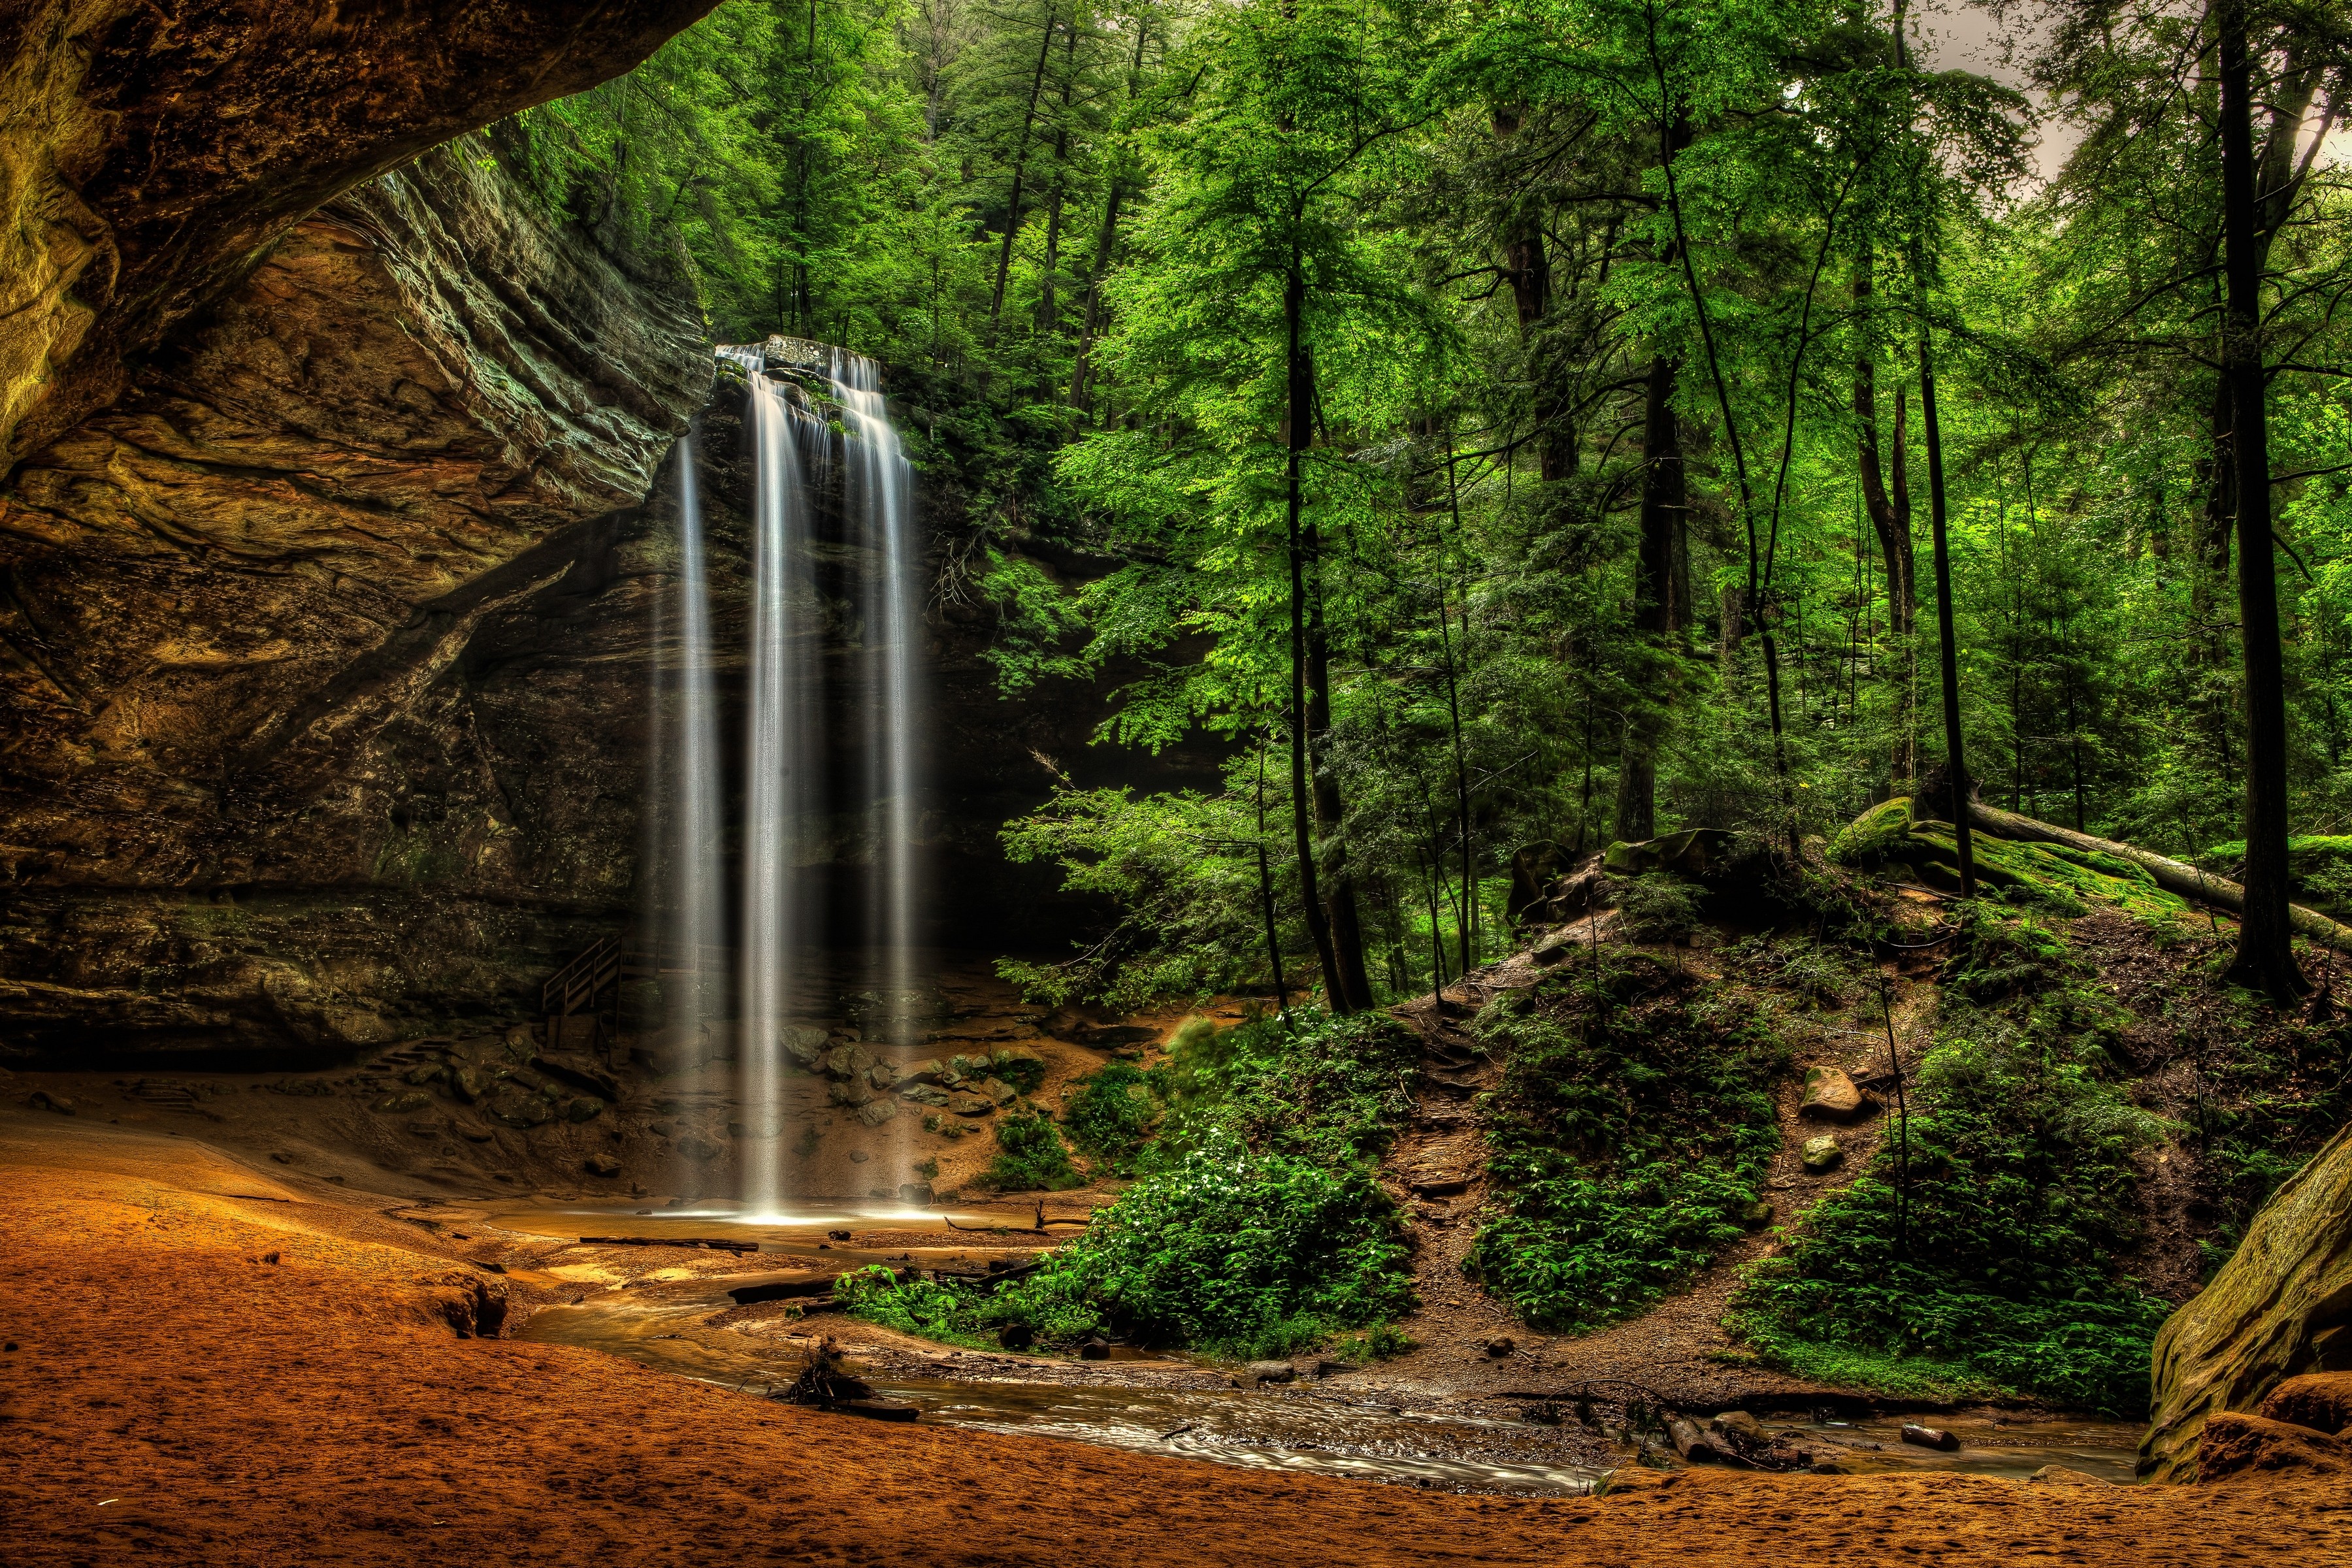 General 3600x2400 trees waterfall cave HDR creeks nature